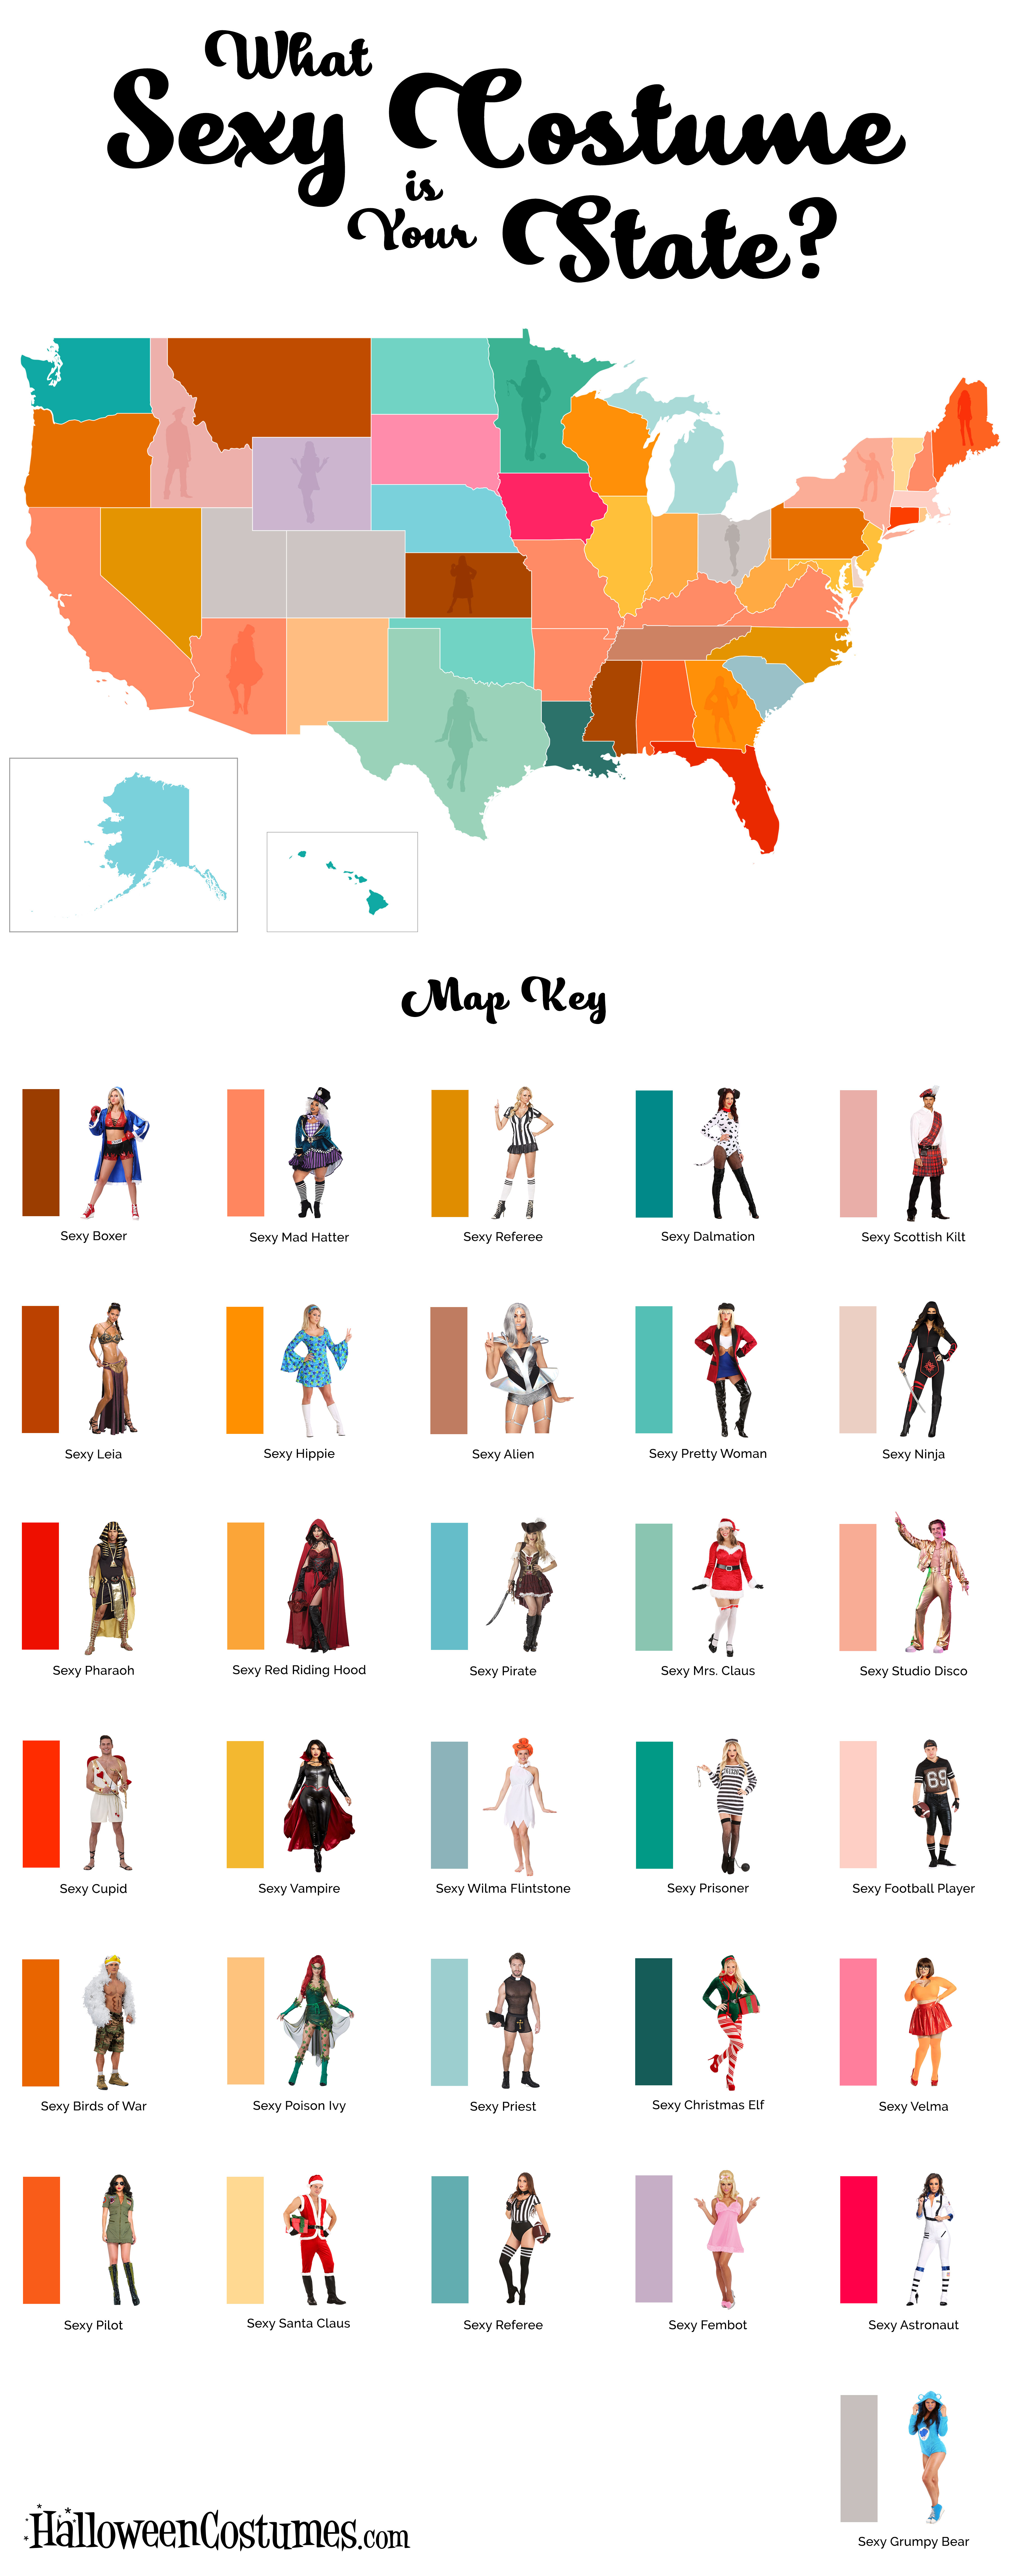 What Sexy Costume is Your State?